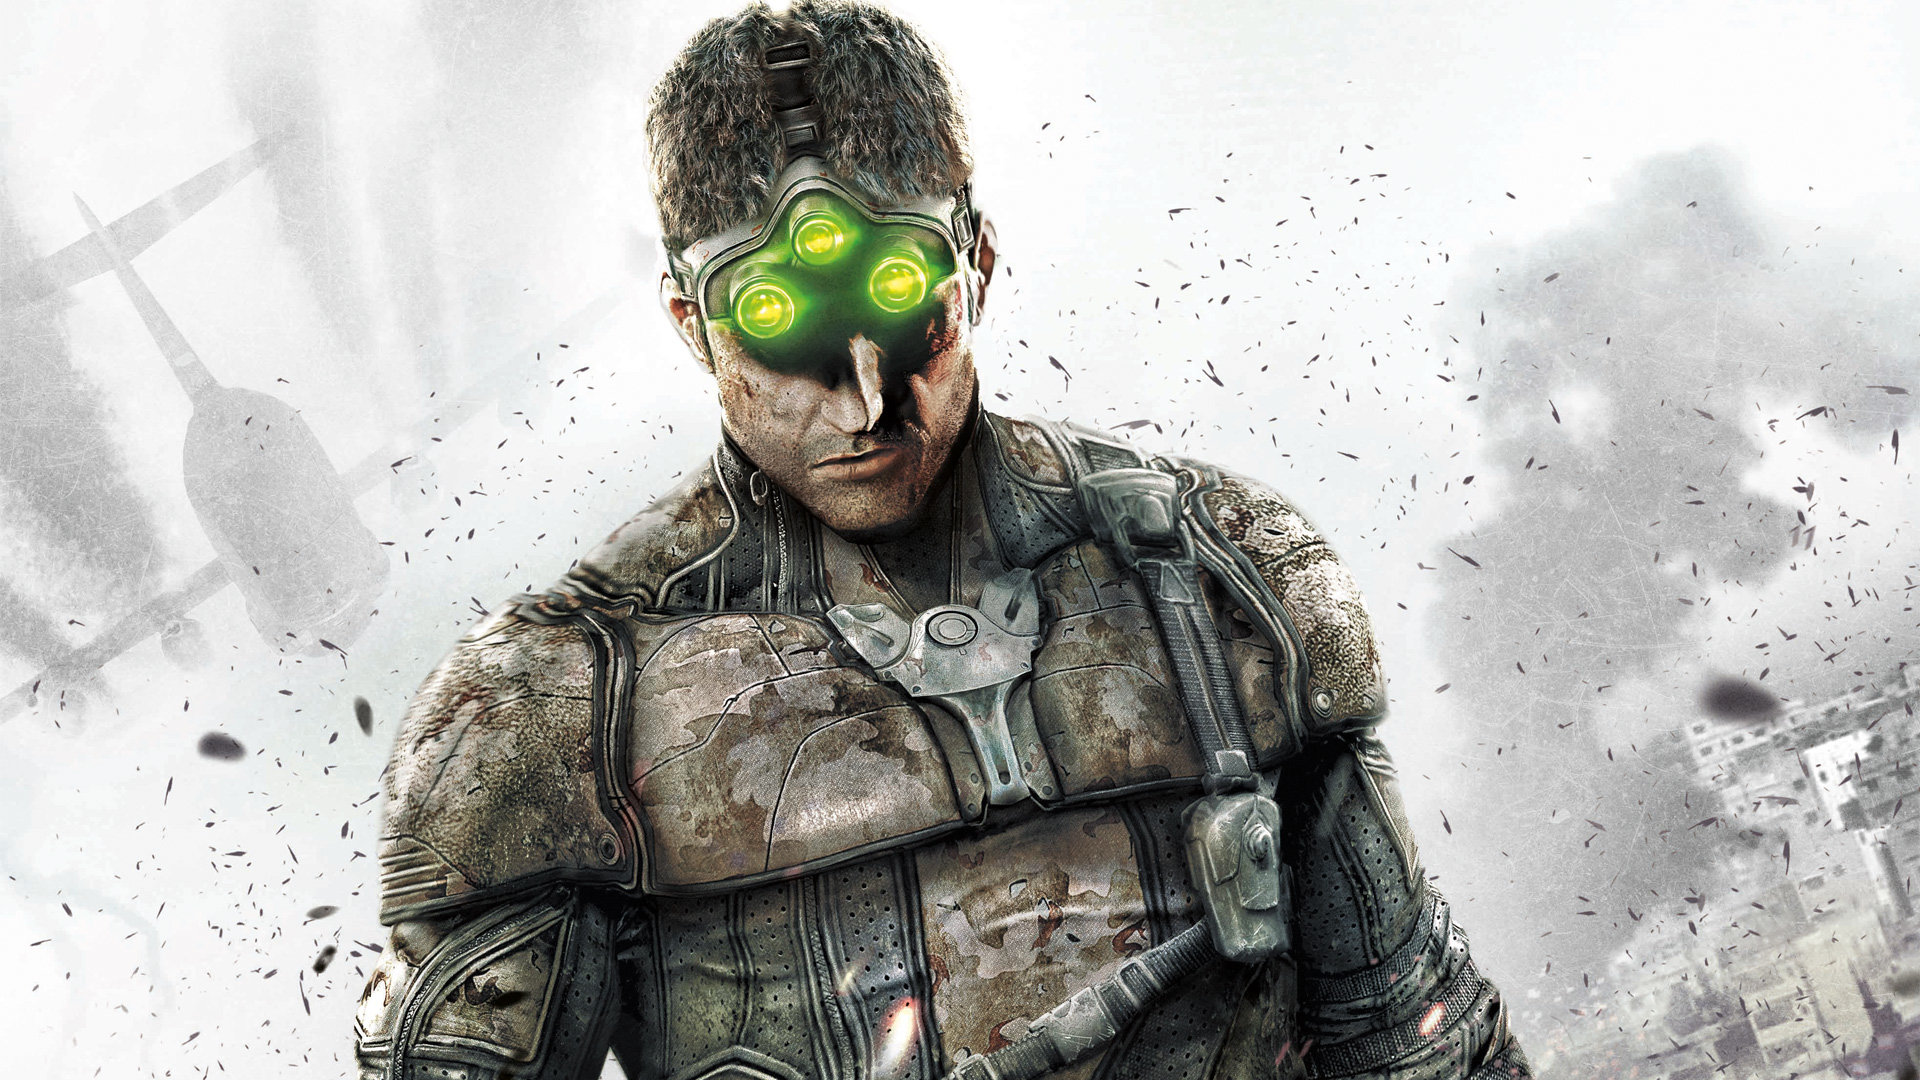 Awesome Tom Clancy's Splinter Cell: Blacklist free wallpaper ID:235943 for full hd 1920x1080 computer